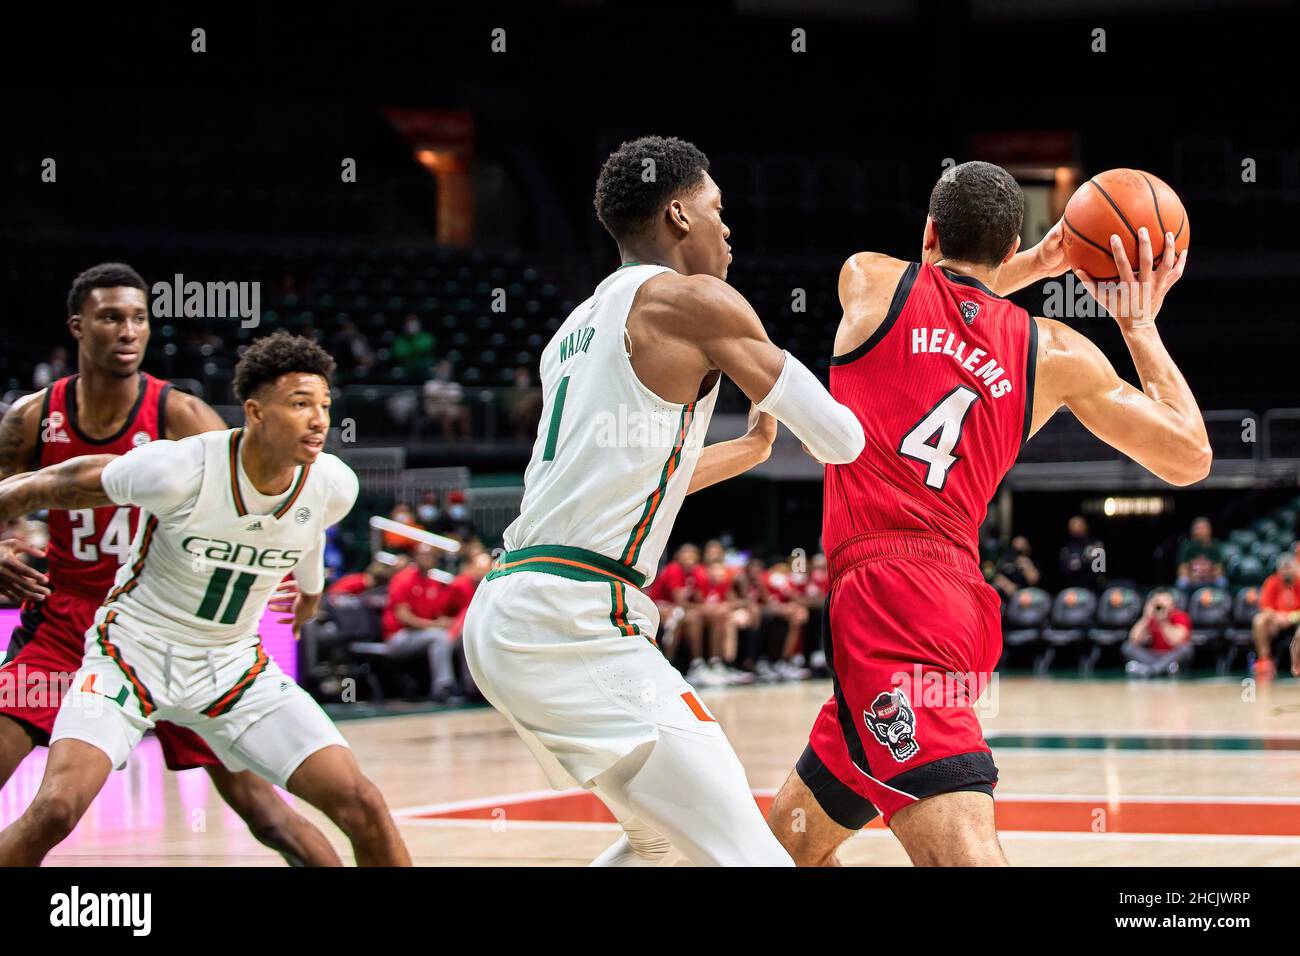 Coral Gables, Florida, USA. 29th Dec. 2021. 4 Jericole Hellems  during the Men’s Basketball between Miami Hurricanes vs NC State in Watsco Center. Credit: Yaroslav Sabitov/YES Market Media/Alamy Live News Stock Photo